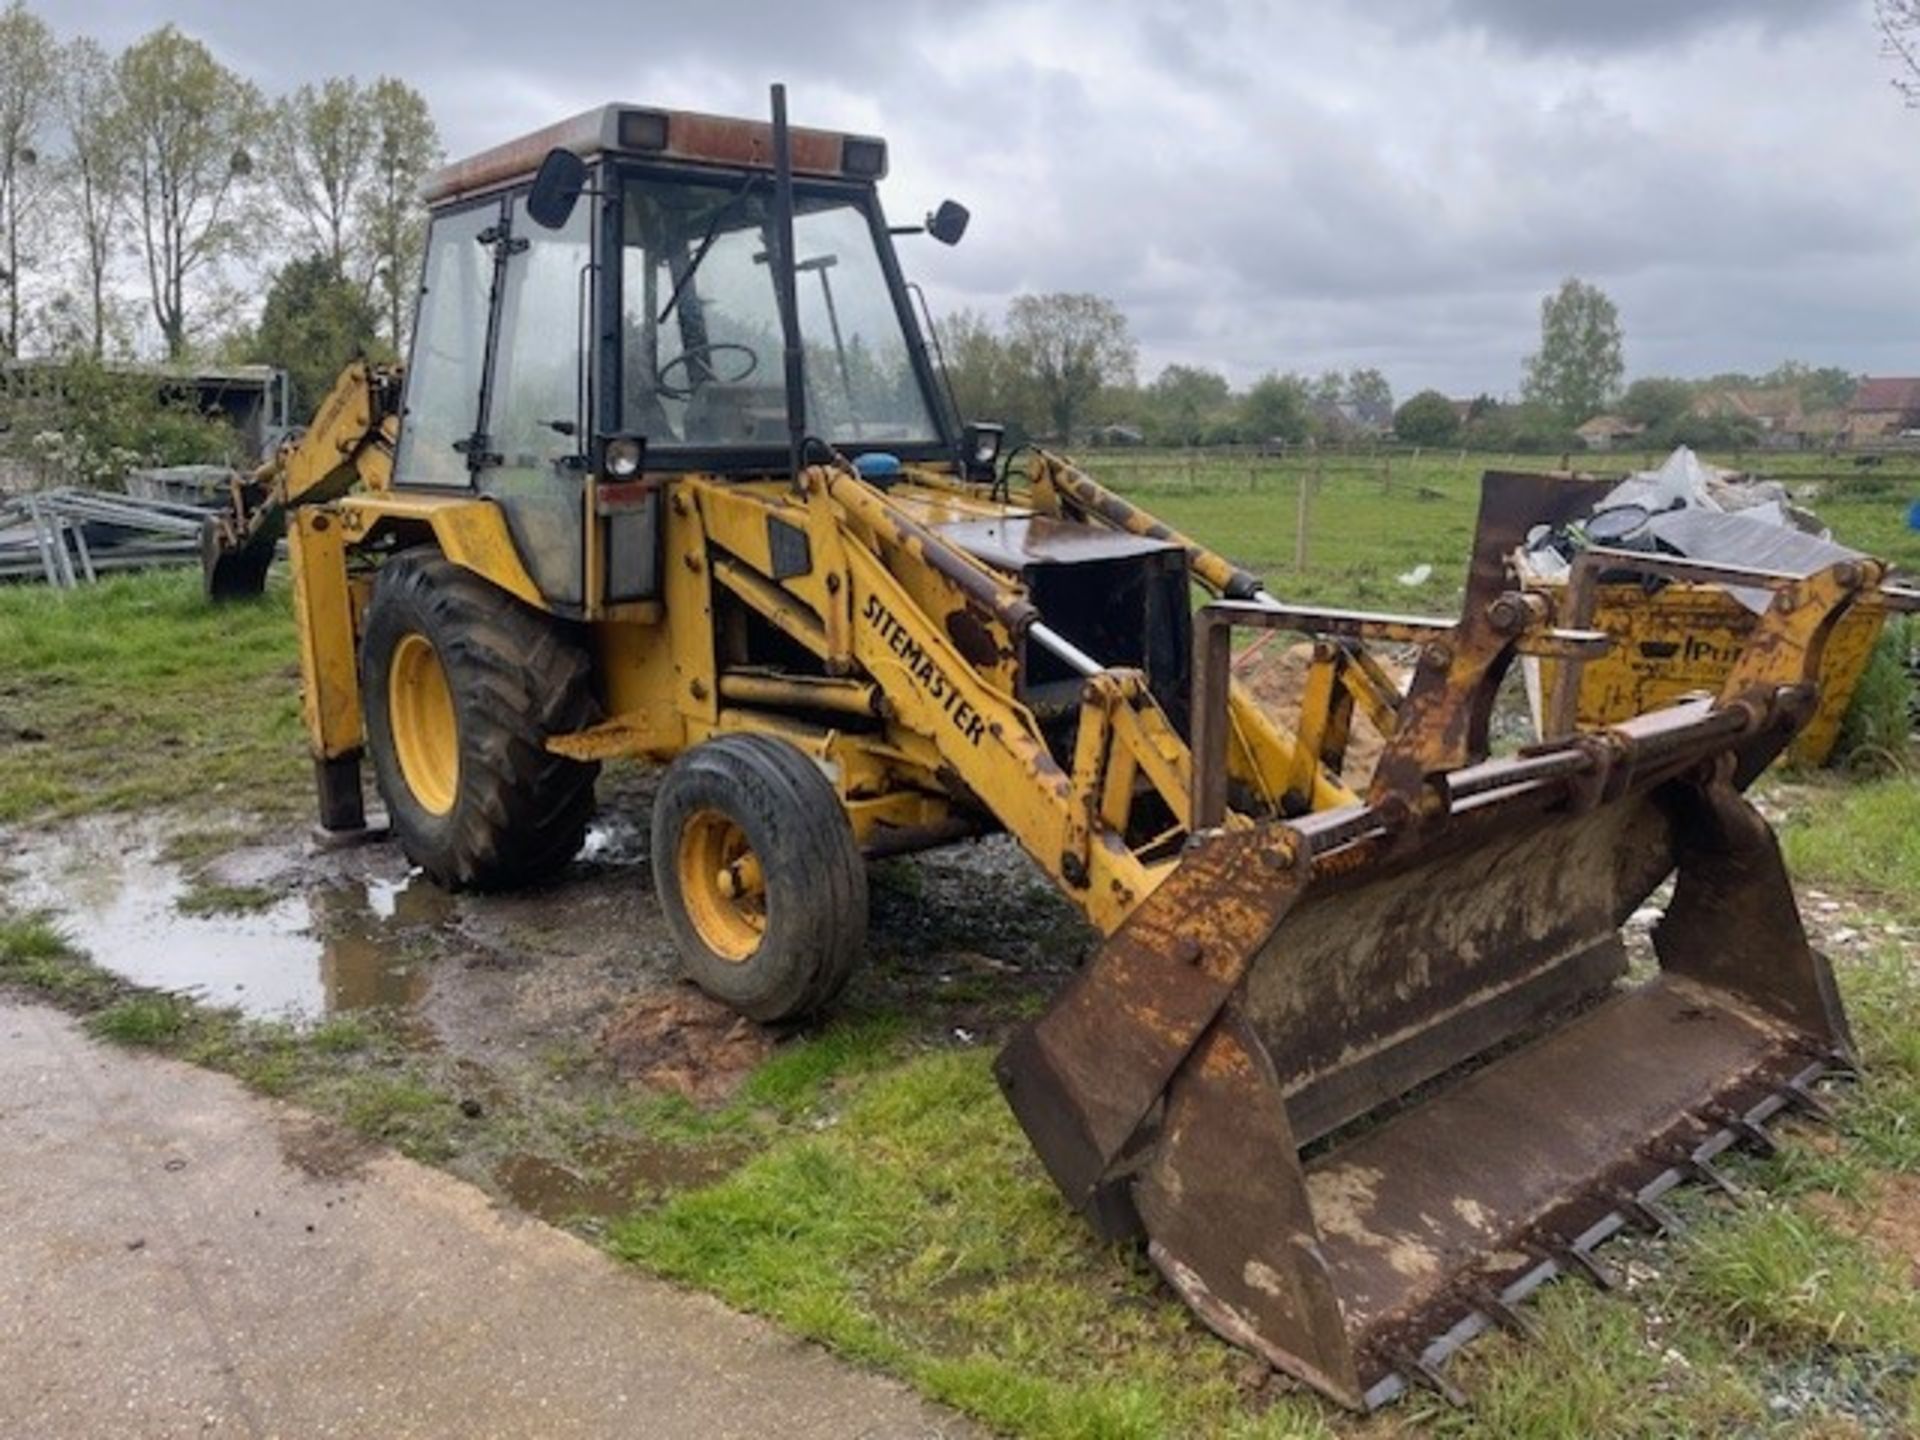 JCB site master - 2 wheel drive with extra long arm. comes with buckets 1515.2 hours on the clock